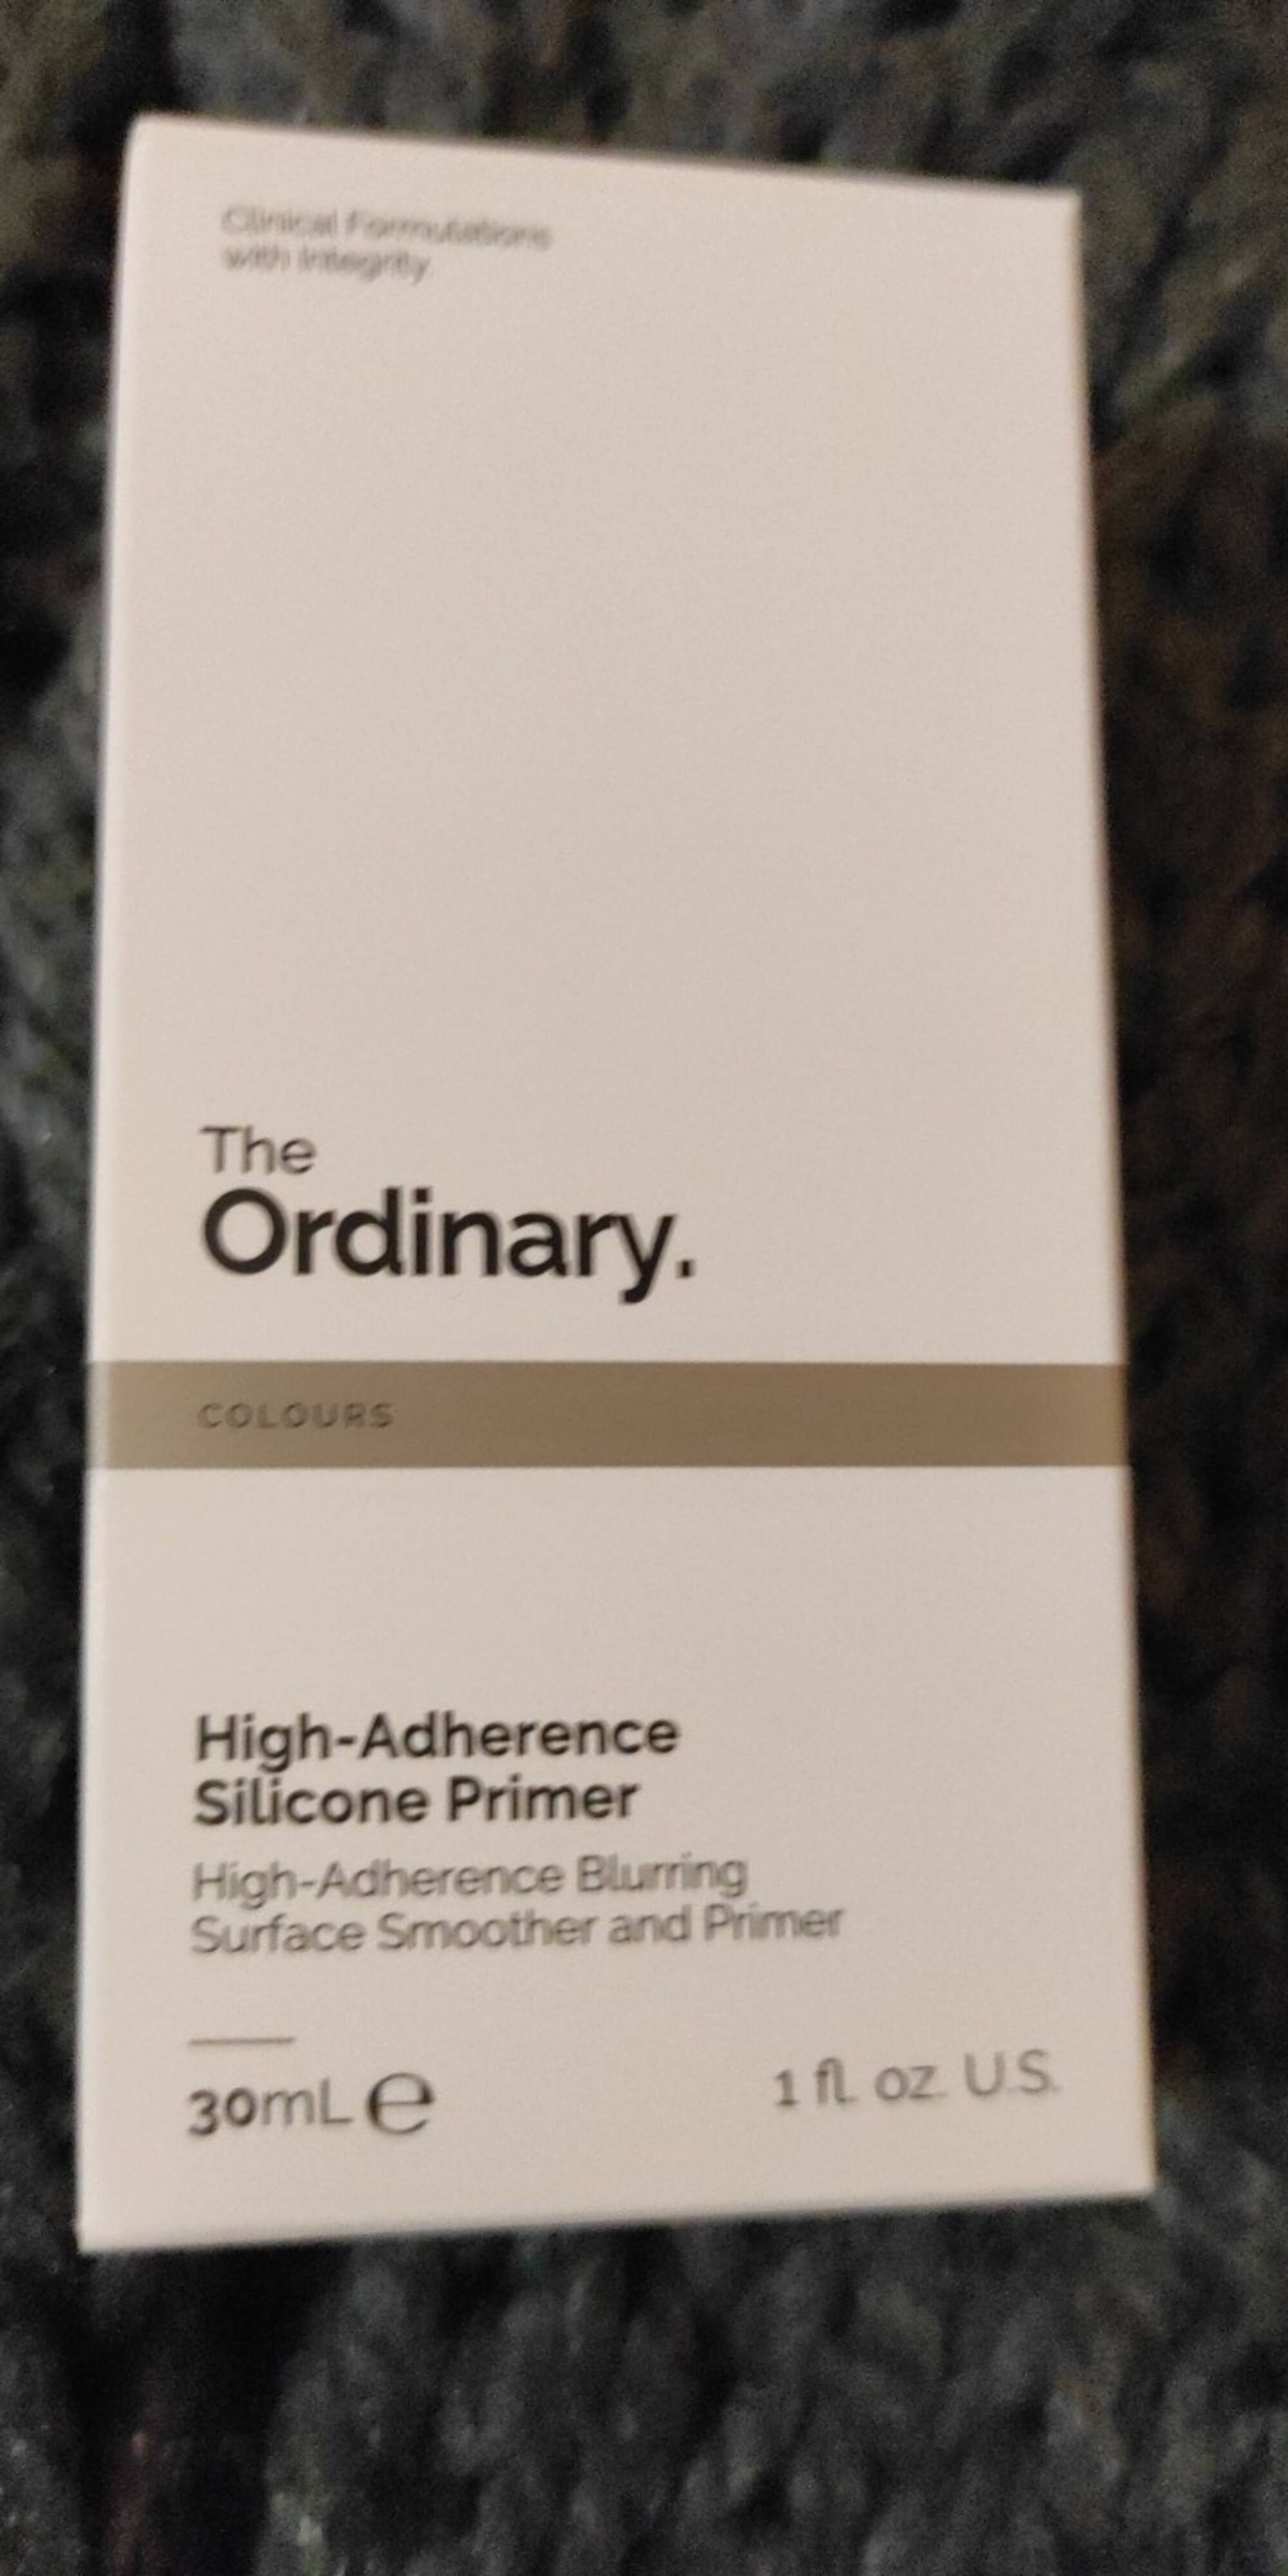 THE ORDINARY - High-adherence Silicone Primer - Surface smoother and Primer